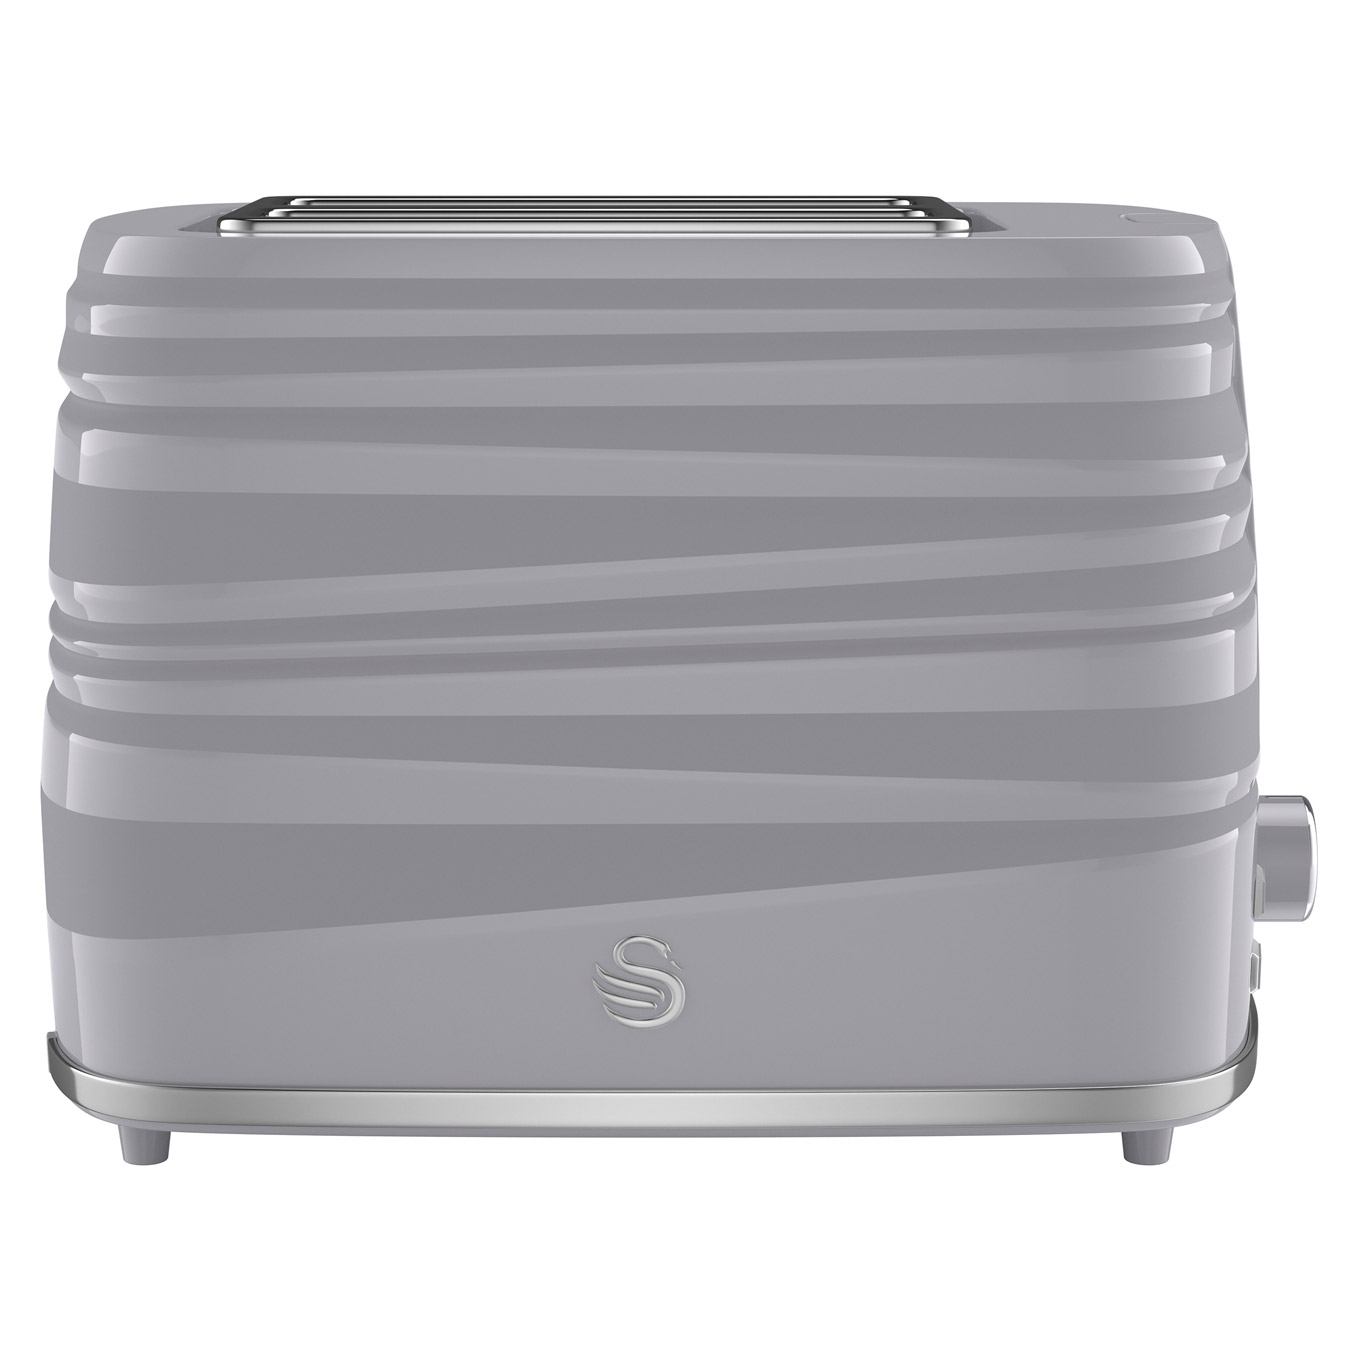 Image of Swan ST31050GRN Symphony 2 Slice Toaster in Grey